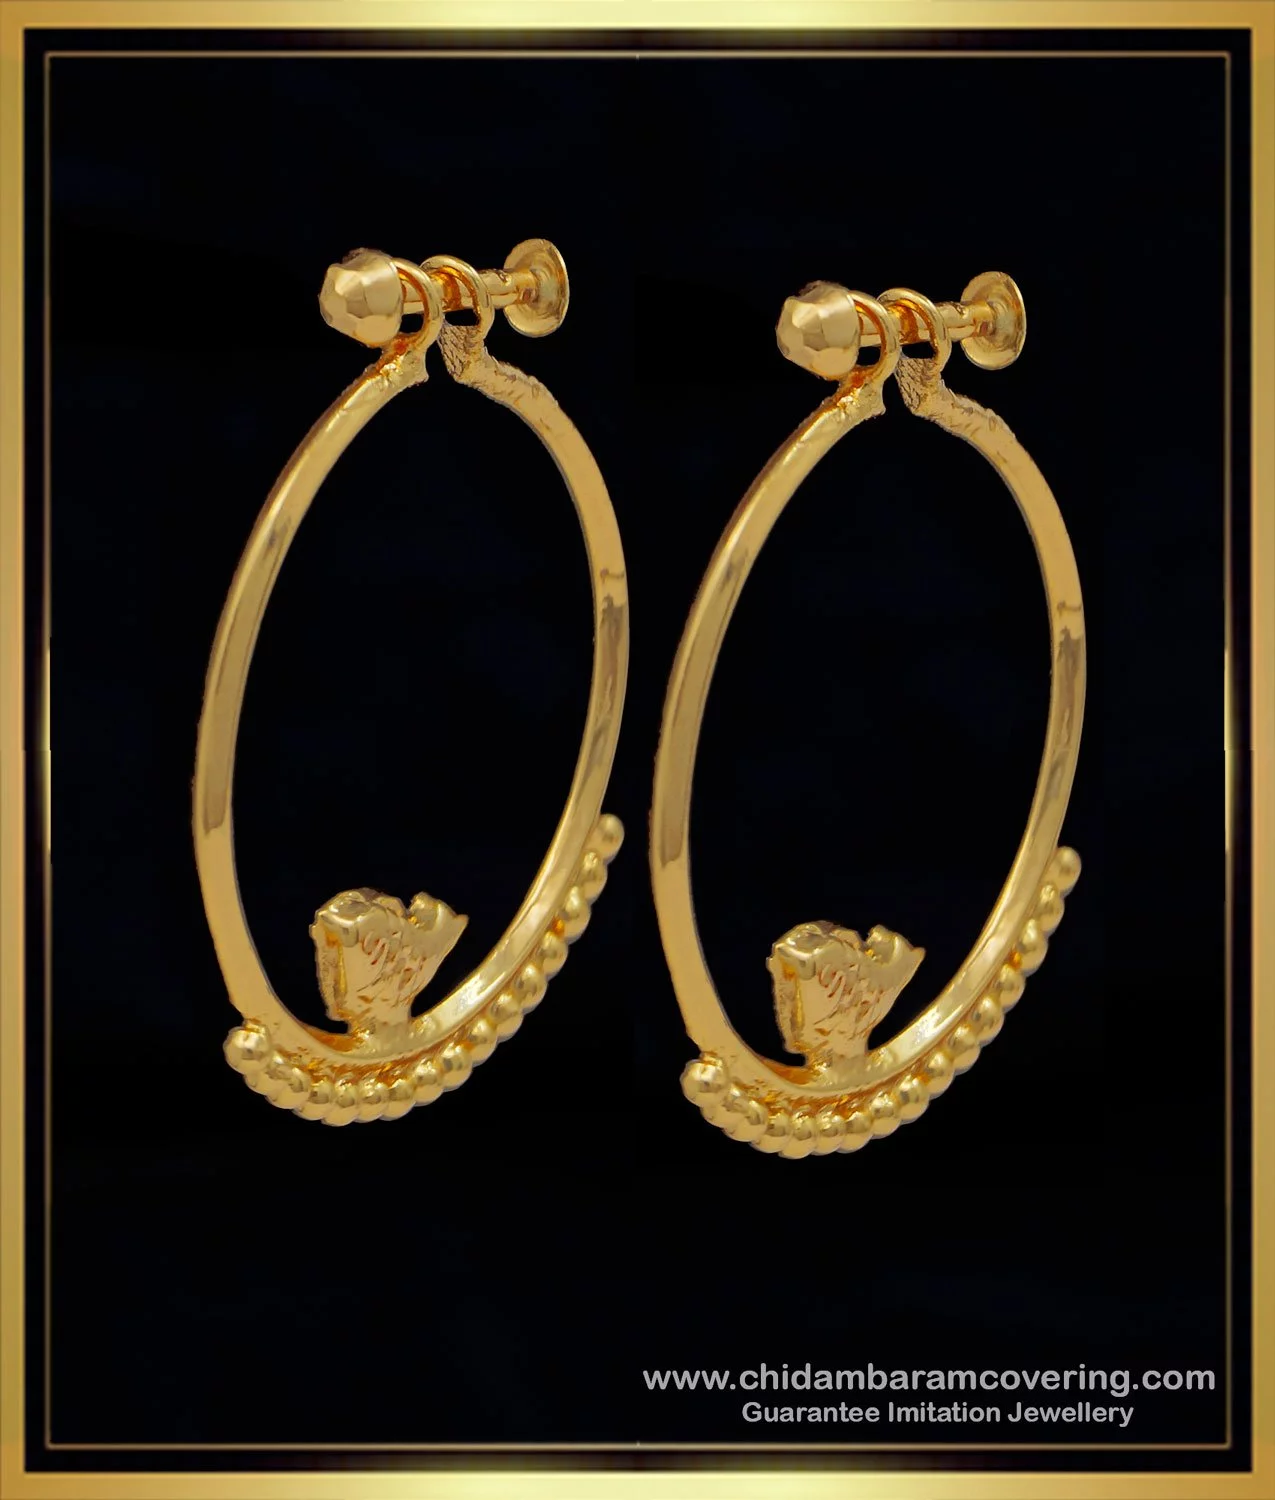 Choosing Your Earring Style to Fit the Occasion | Fashion earrings, Types  of earrings, Earrings